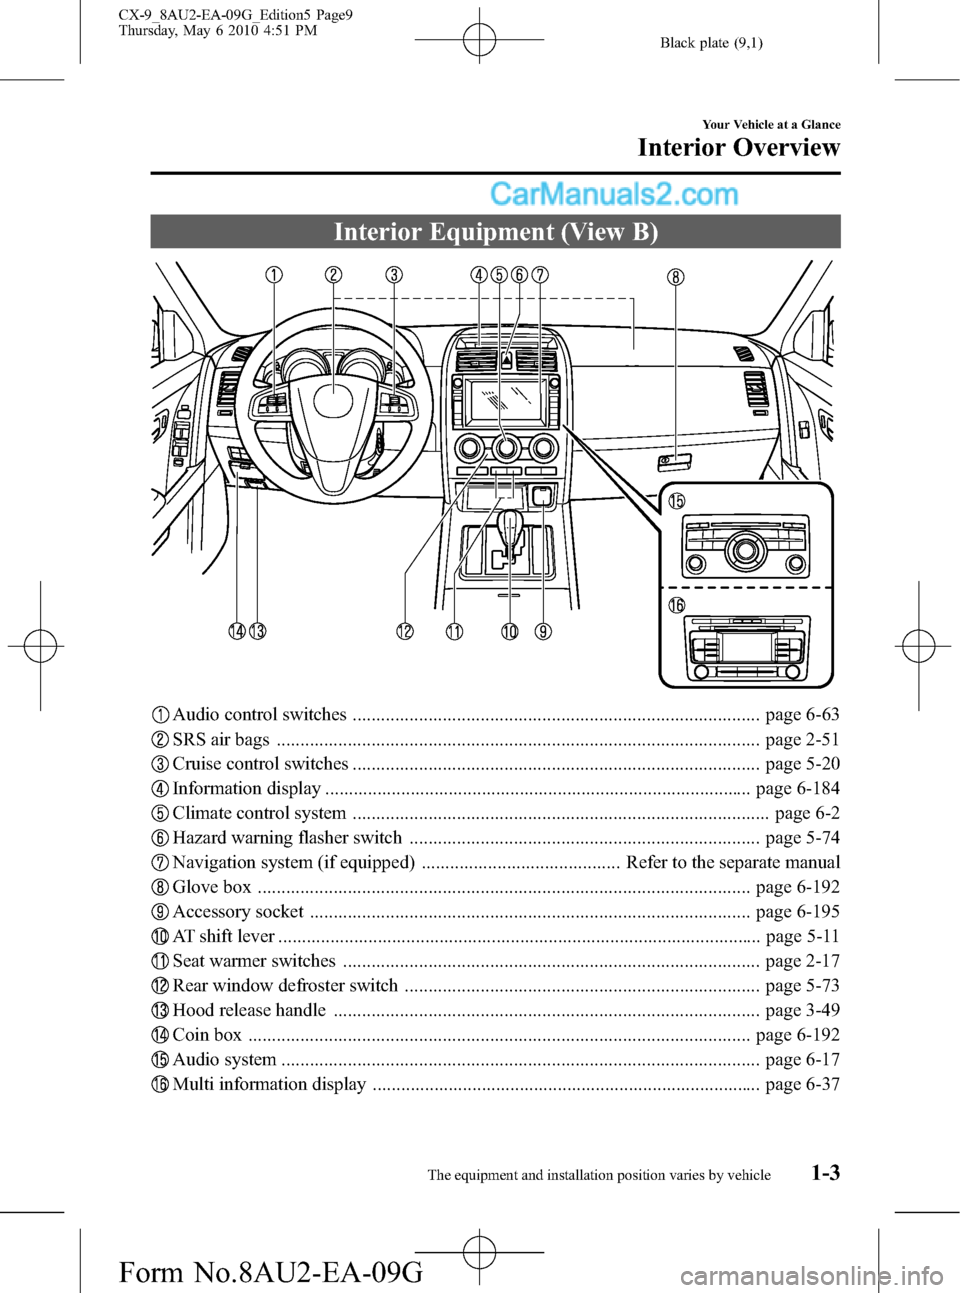 MAZDA MODEL CX-9 2010  Owners Manual (in English) Black plate (9,1)
Interior Equipment (View B)
Audio control switches ...................................................................................... page 6-63
SRS air bags .....................